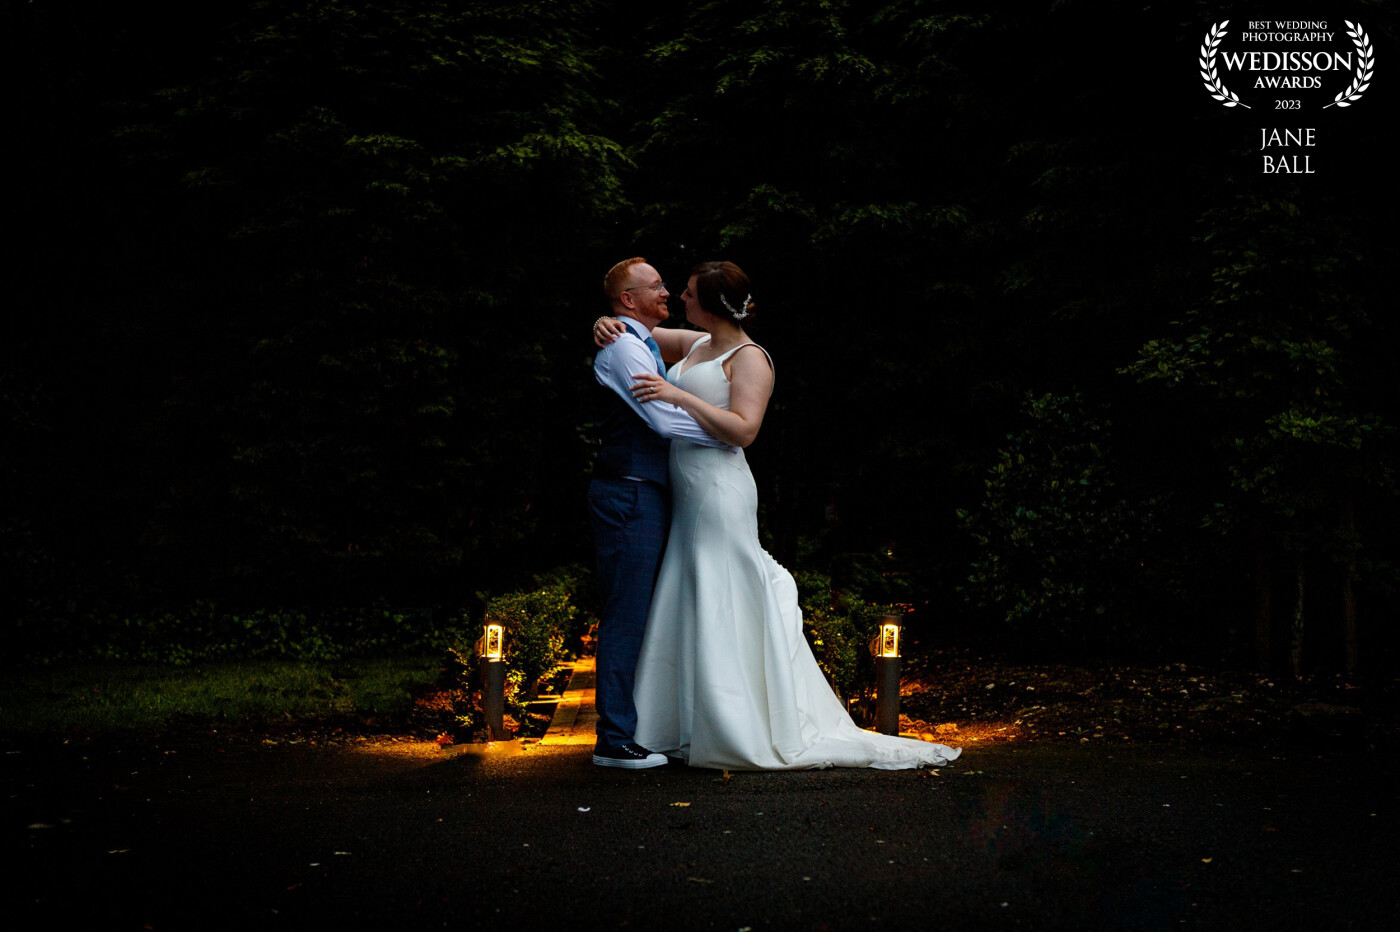 I'd taken my couple along this little path to the woodland beyond for their evening portraits. When we came back the lights had come on and this composition was there for the taking. Such a simple shot with the dark yew trees behind providing the clean background and the lights either side balancing the scene perfectly.